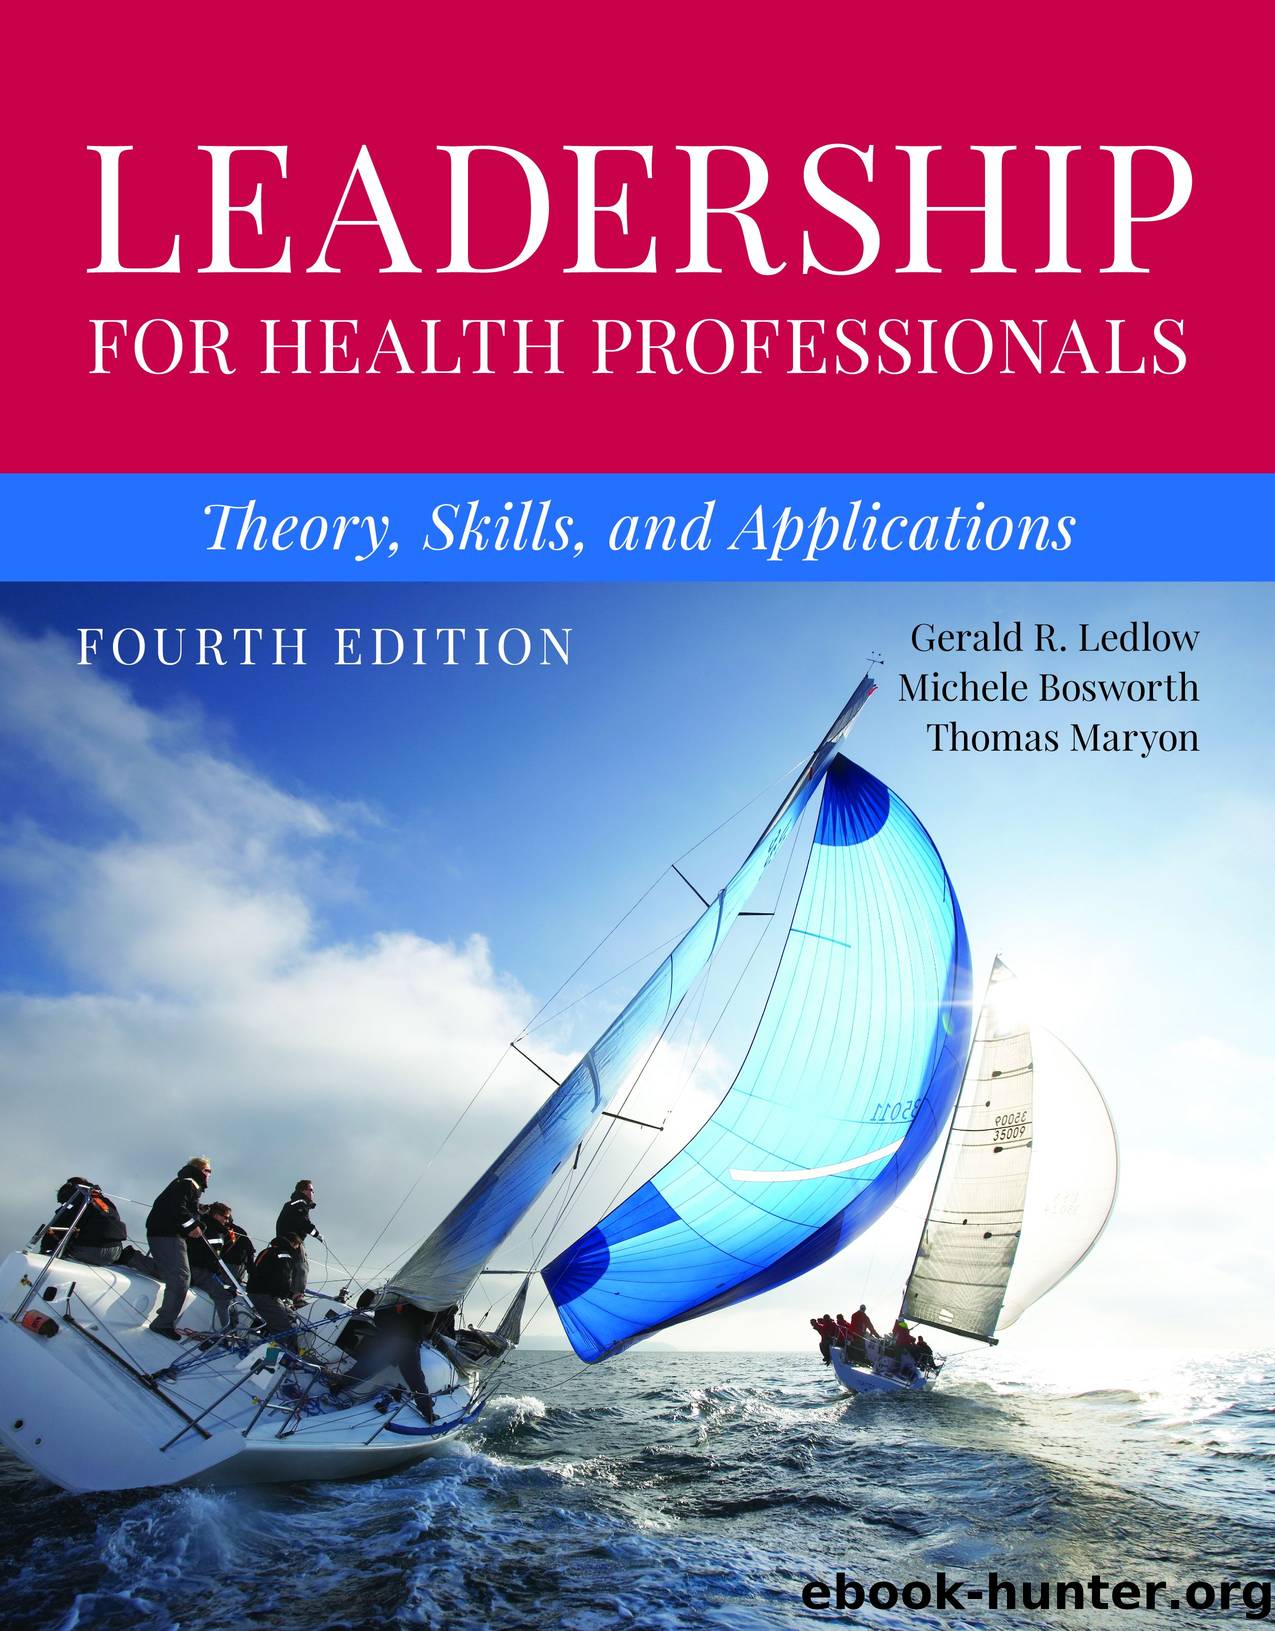 Leadership for Health Professionals: Theory, Skills, and Applications by Ledlow Gerald (Jerry) R.;Bosworth Michele;Maryon Thomas;